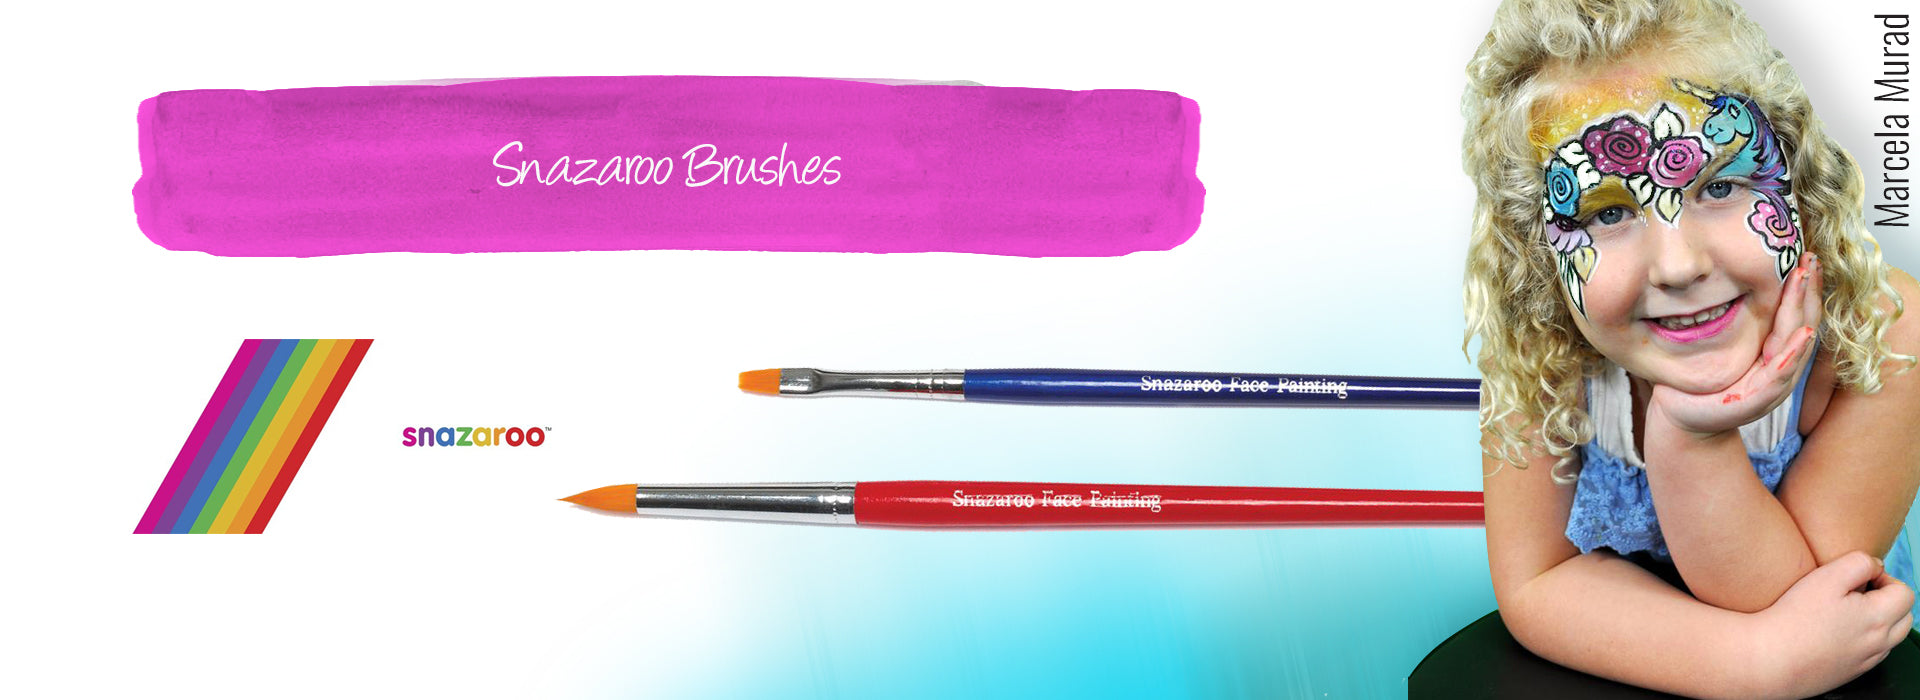 Snazaroo Brushes and Sponges